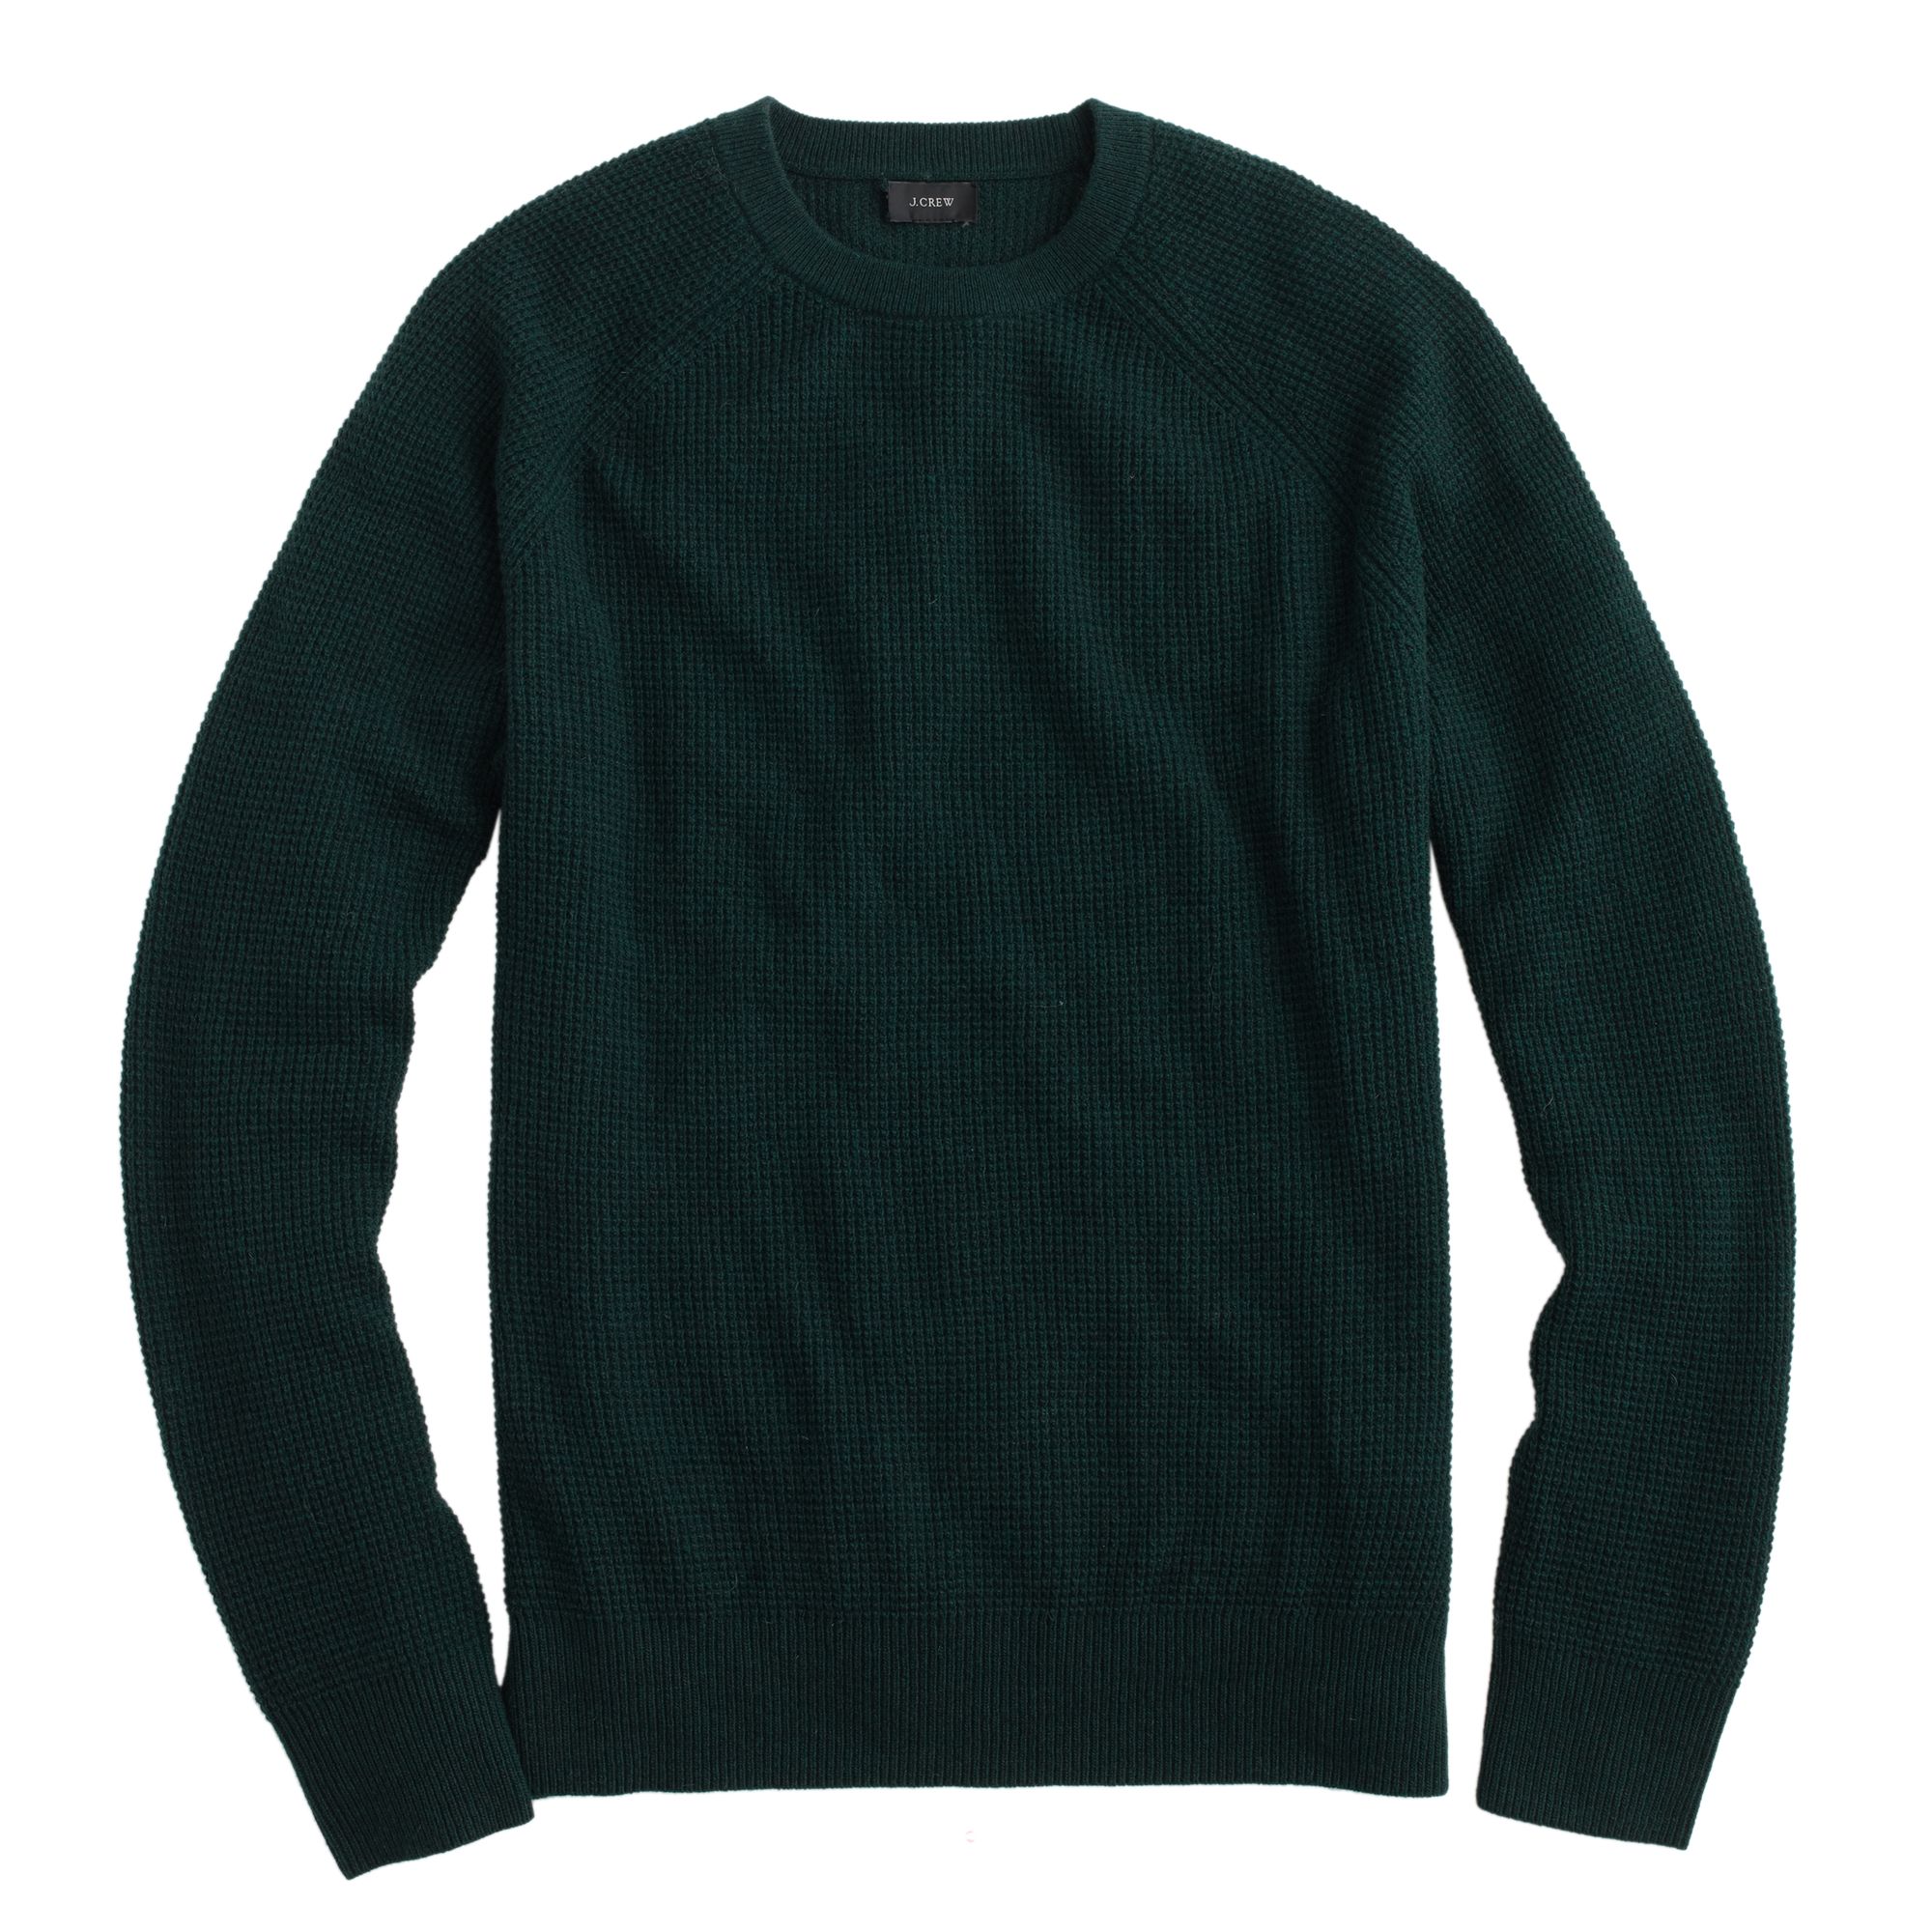 Lyst - J.Crew Woolcashmere Solid Waffle Sweater in Green for Men